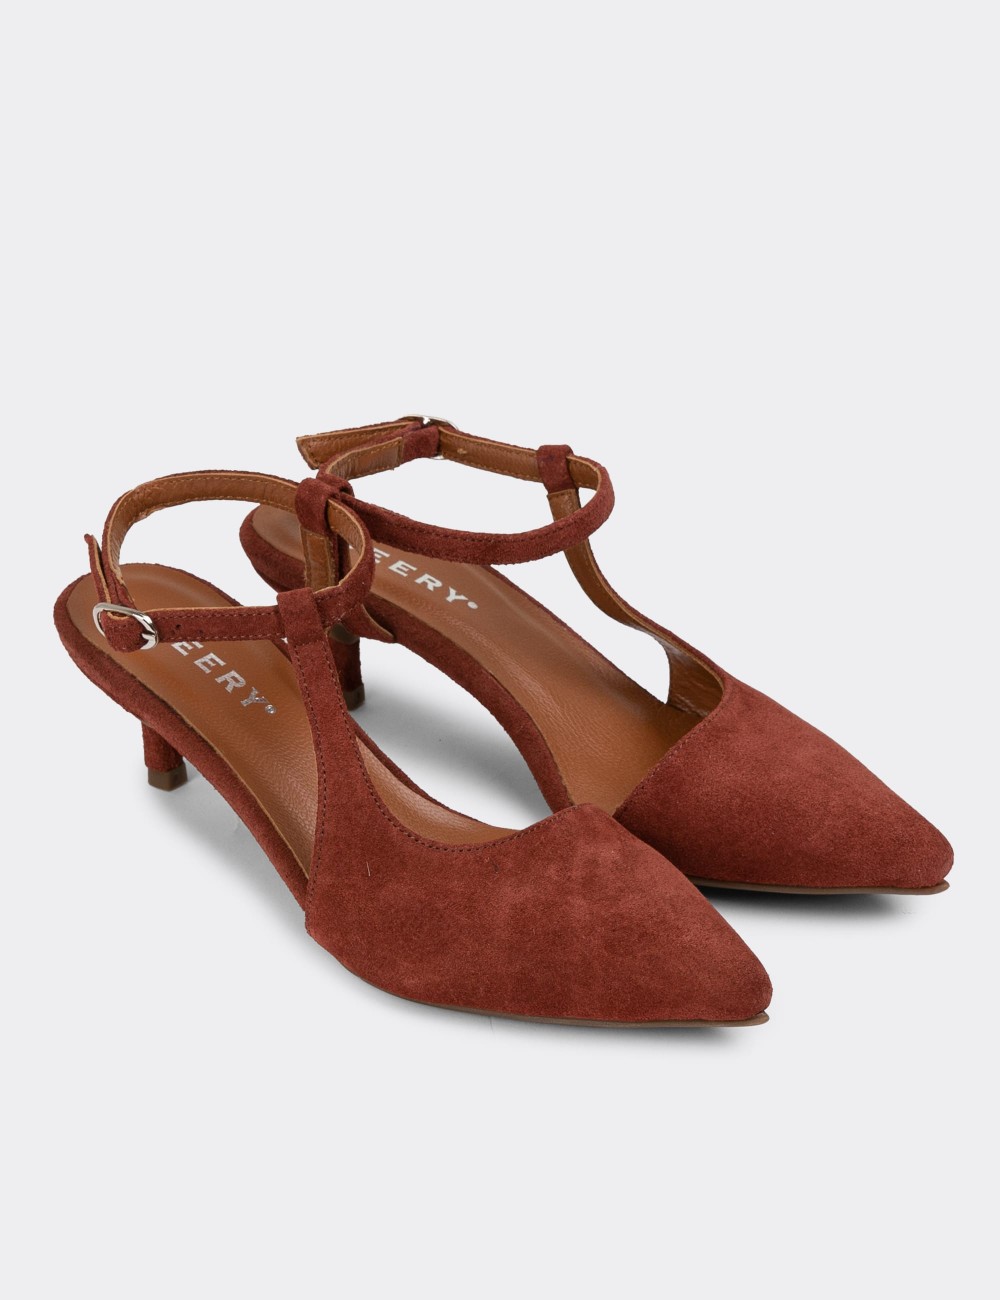 Tan Suede Leather Pumps - R8509ZTBAC01